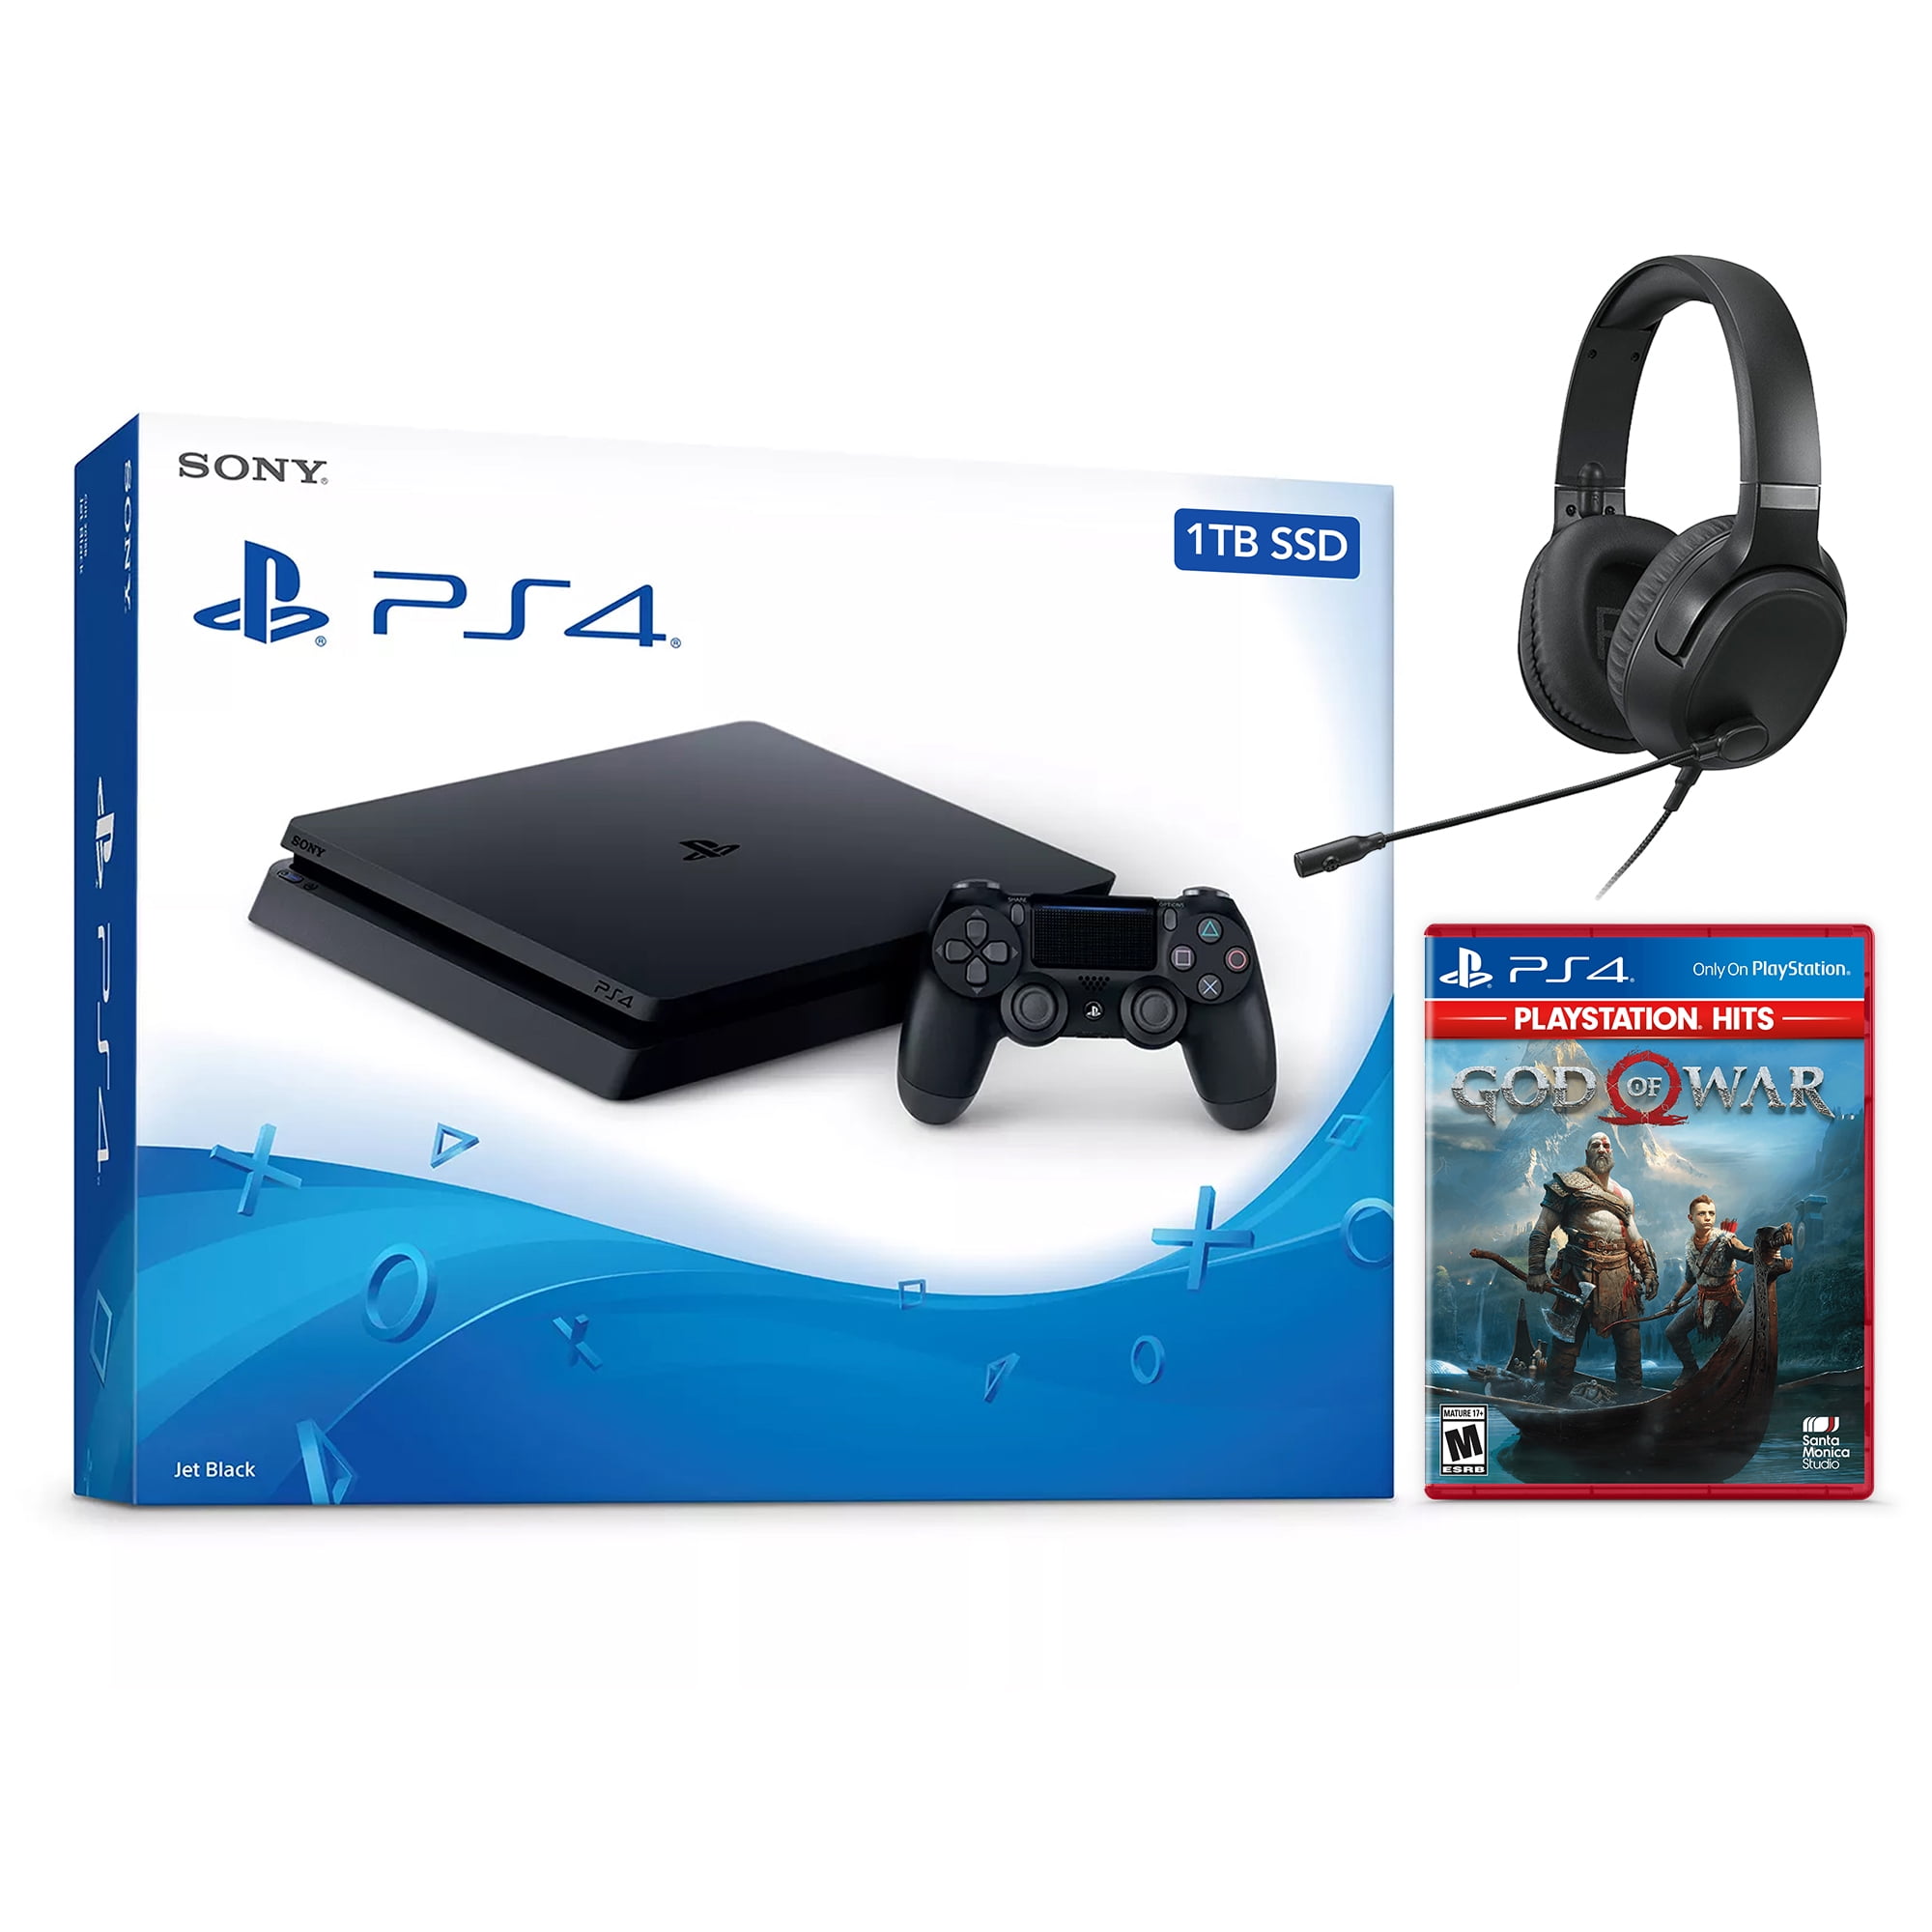 Sony PlayStation 4 Slim God of War PlayStation Hits Bundle Upgrade 1TB SSD Console, Jet Black, with Mytrix Chat Headset - Fast Solid State Drive Enhanced PS4 Console - Walmart.com